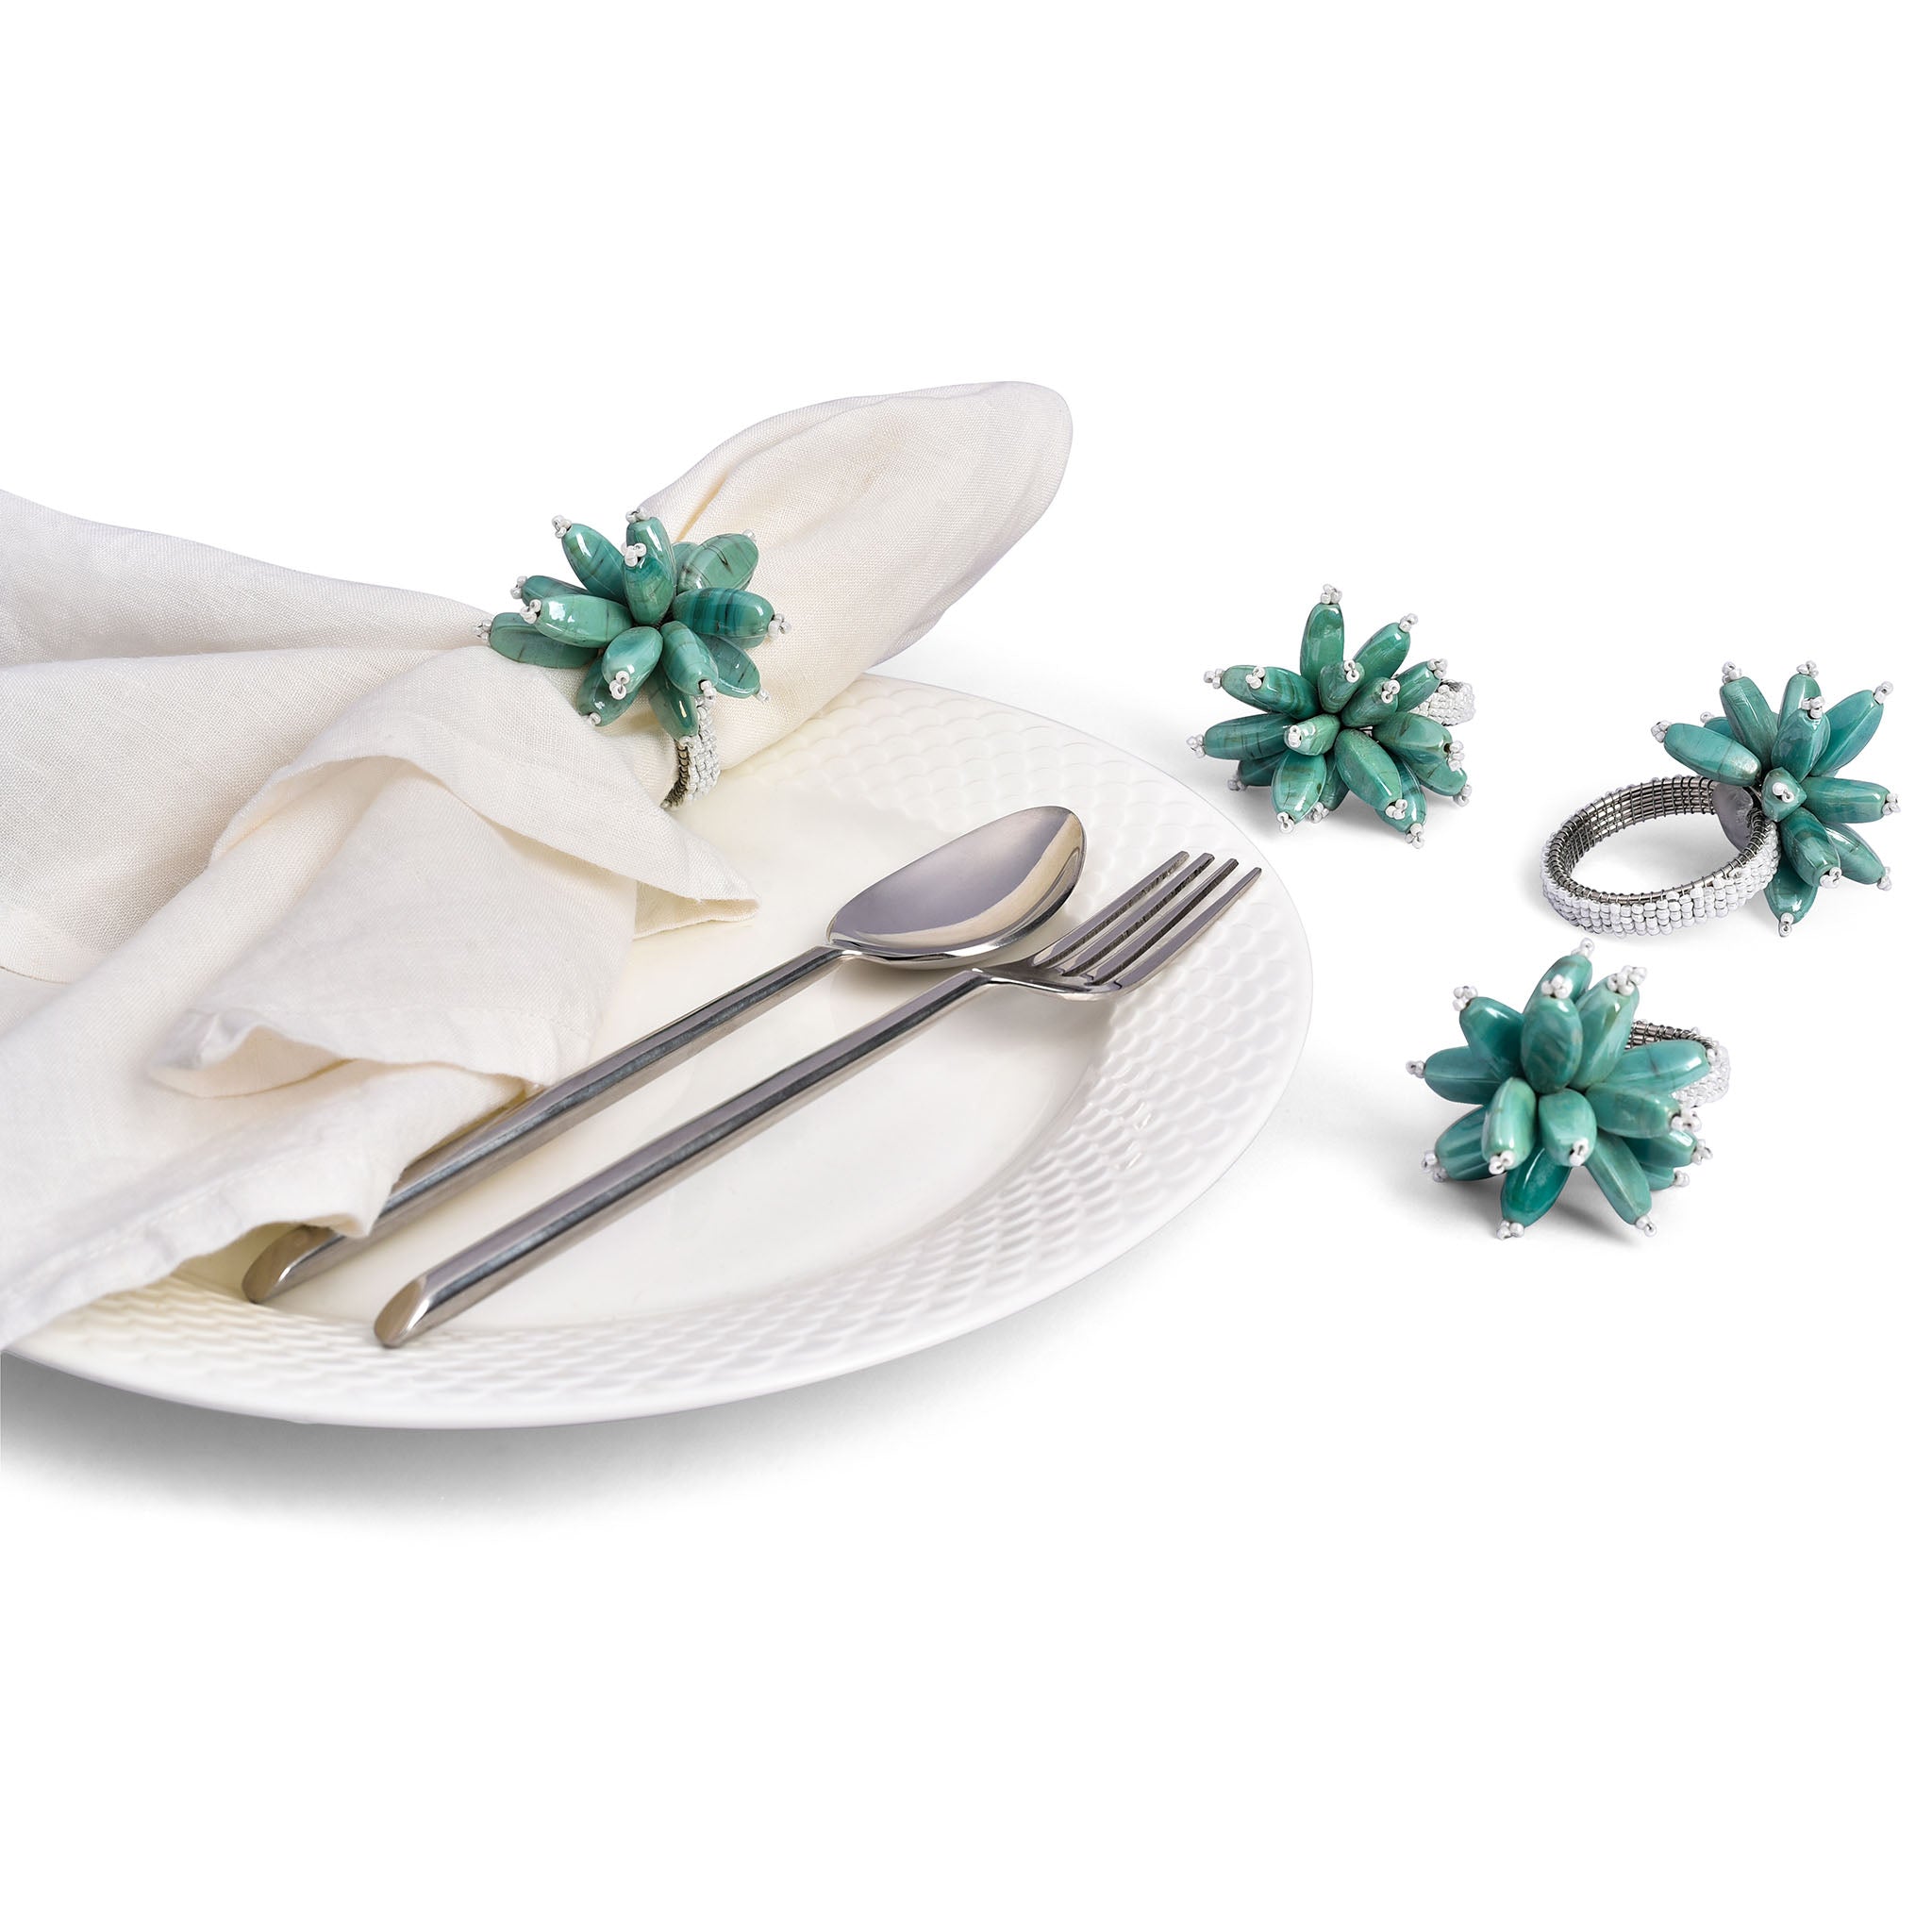 Ringo Star Fish Table Setting for 4 - Embroidered Placemats, Napkin Rings & Table Runner in Teal & Gold